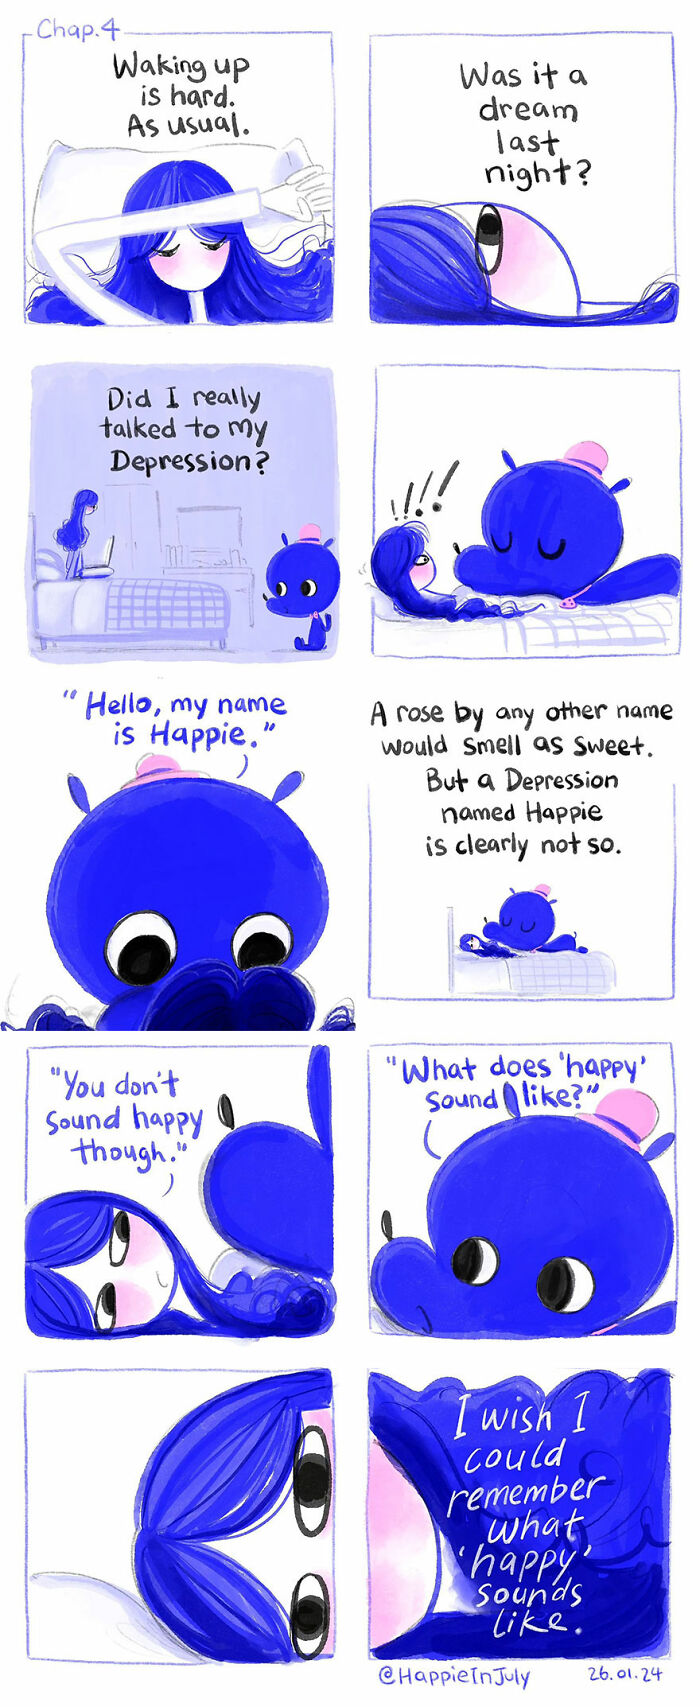 I Created A Webcomic About A Depression Named Happie And A Girl Named July, And How They Learn To Live With Each Other